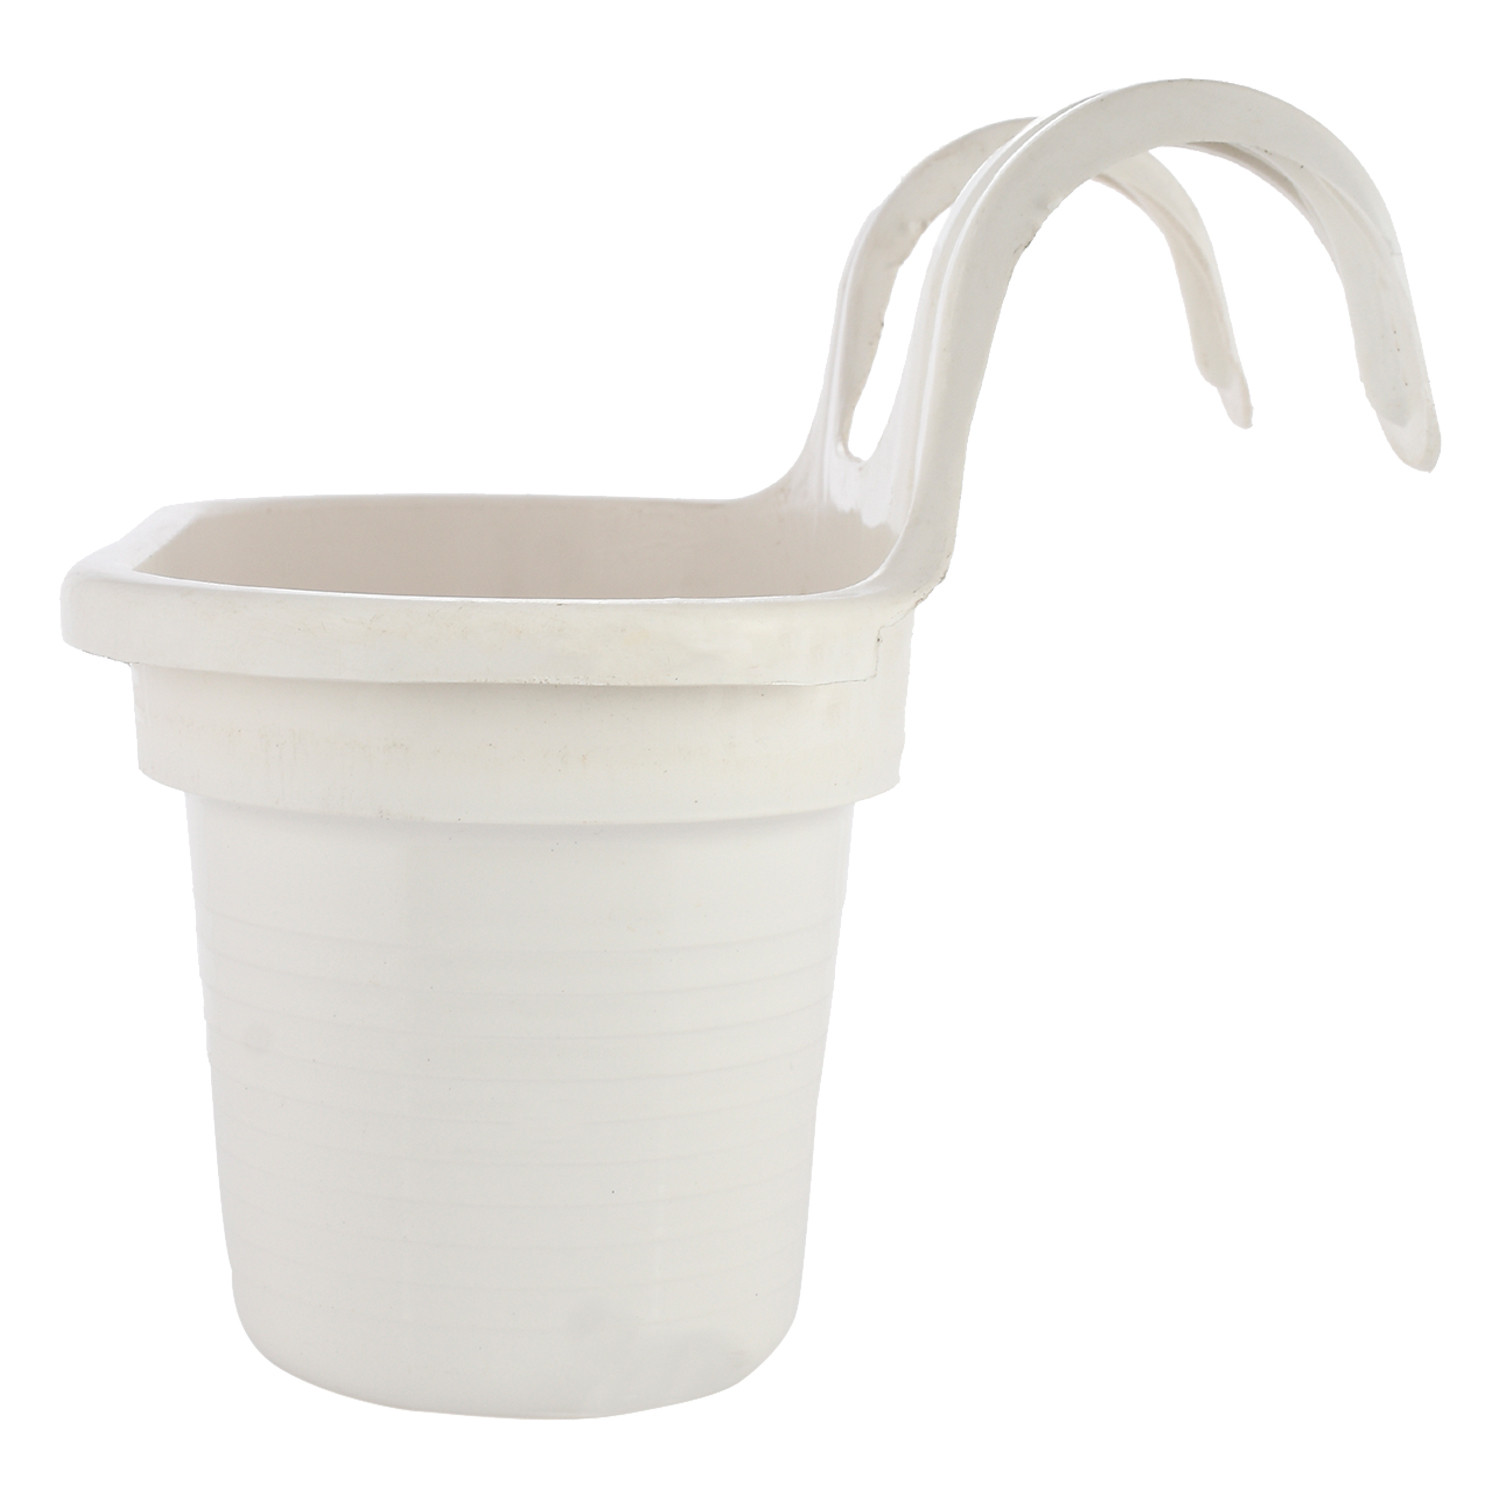 Kuber Industries Hanging Flower Pot|Double Hook Plant Container|Durable Plastic Glossy Finish Pots for Home|Balcony|Garden|12 Inch|Pack of 2 (White & Blue)